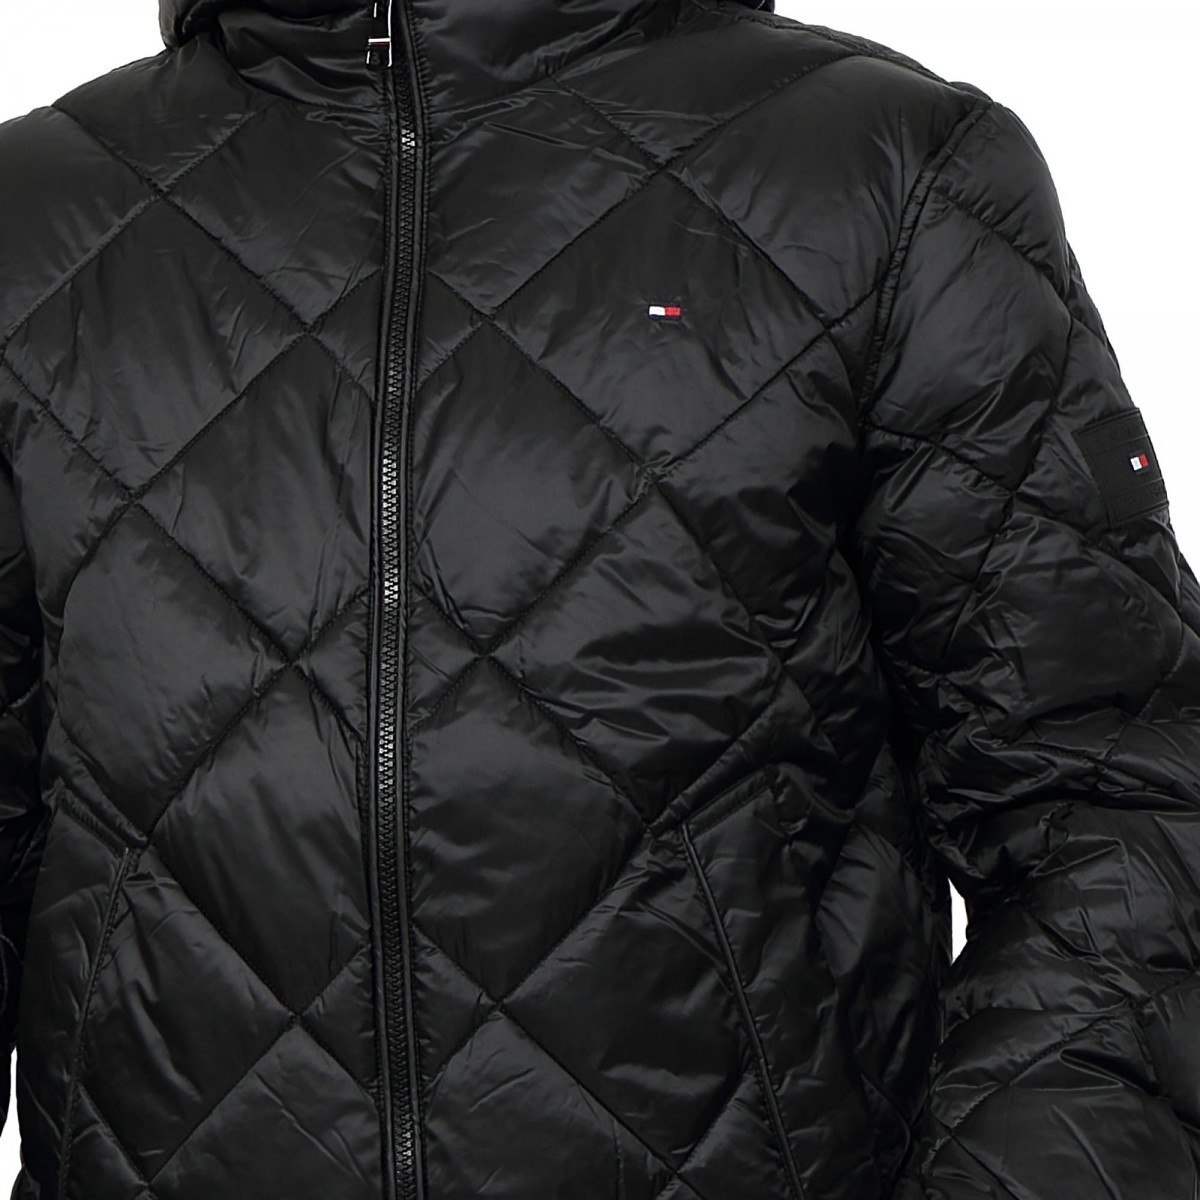 TOMMY HILFIGER DIAMOND QUILTED HOODED JACKET